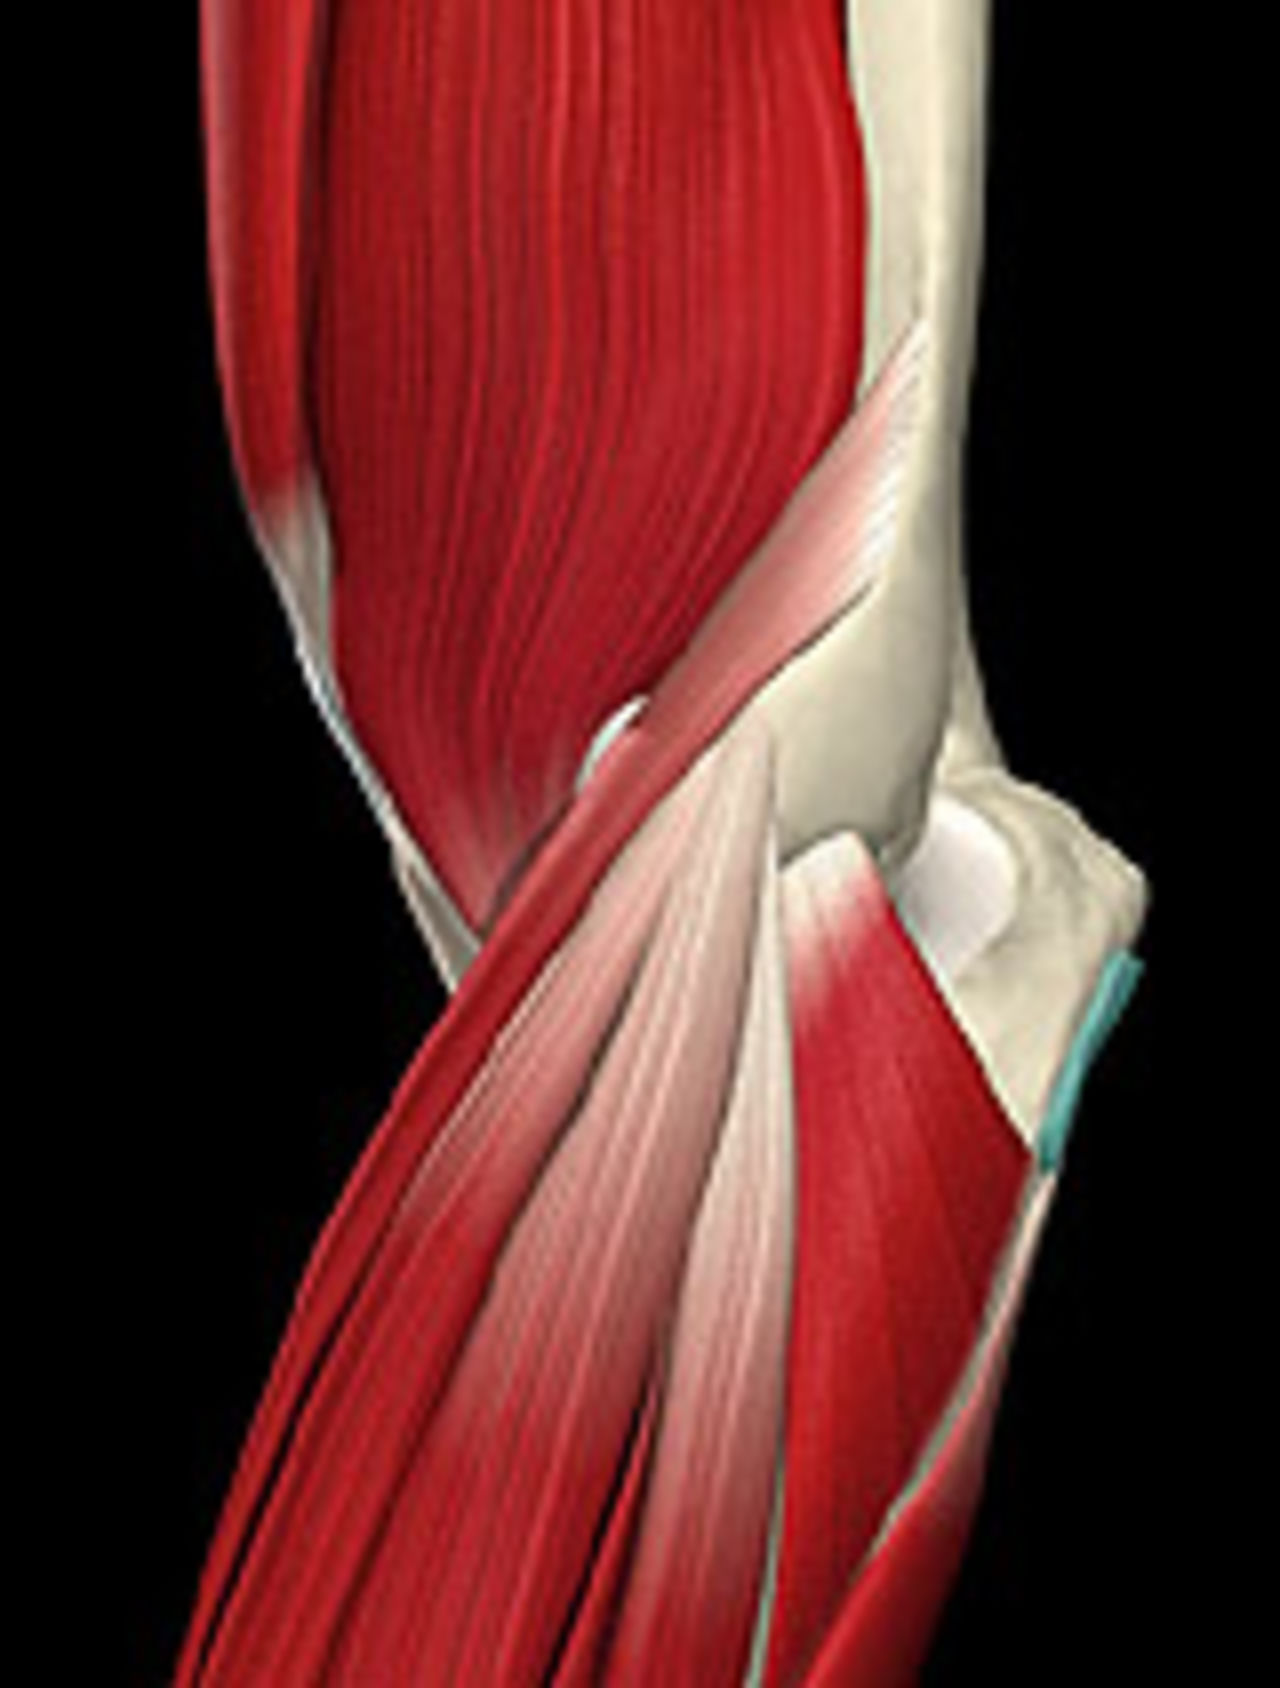 The lateral elbow showing where the deep muscles of the forearm are attached